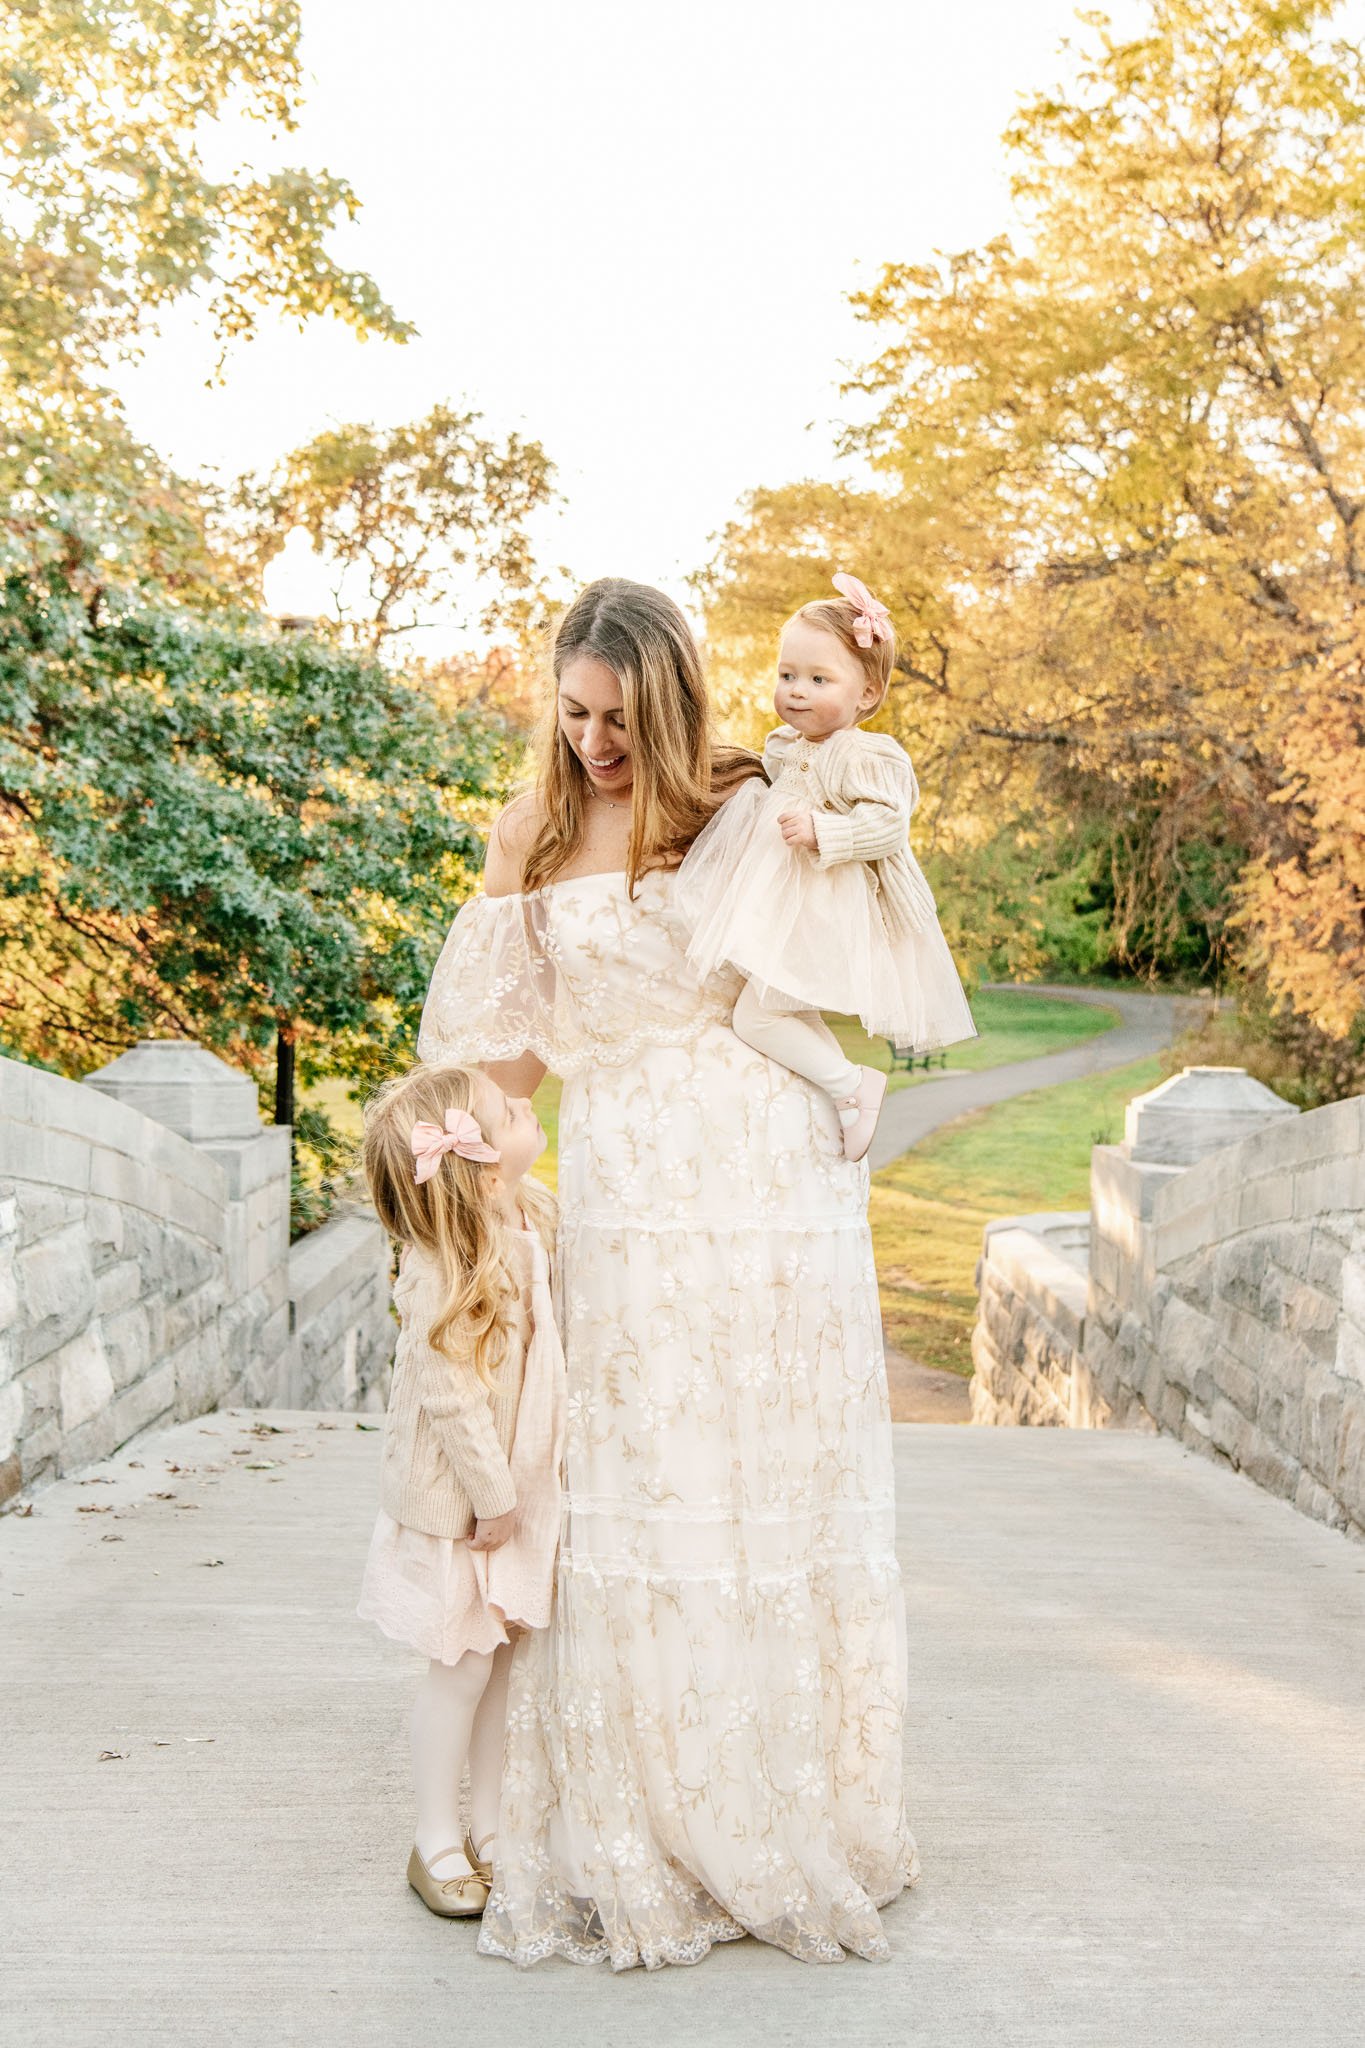  A mother in a white lacey dress smiles at her young daughters, captured by Nicole Hawkins Photography in NJ. Family with two little girls family wearing white for a family pic outside #NicoleHawkinsPhotography #NicoleHawkinsFamilies #FallFamilyPhoto